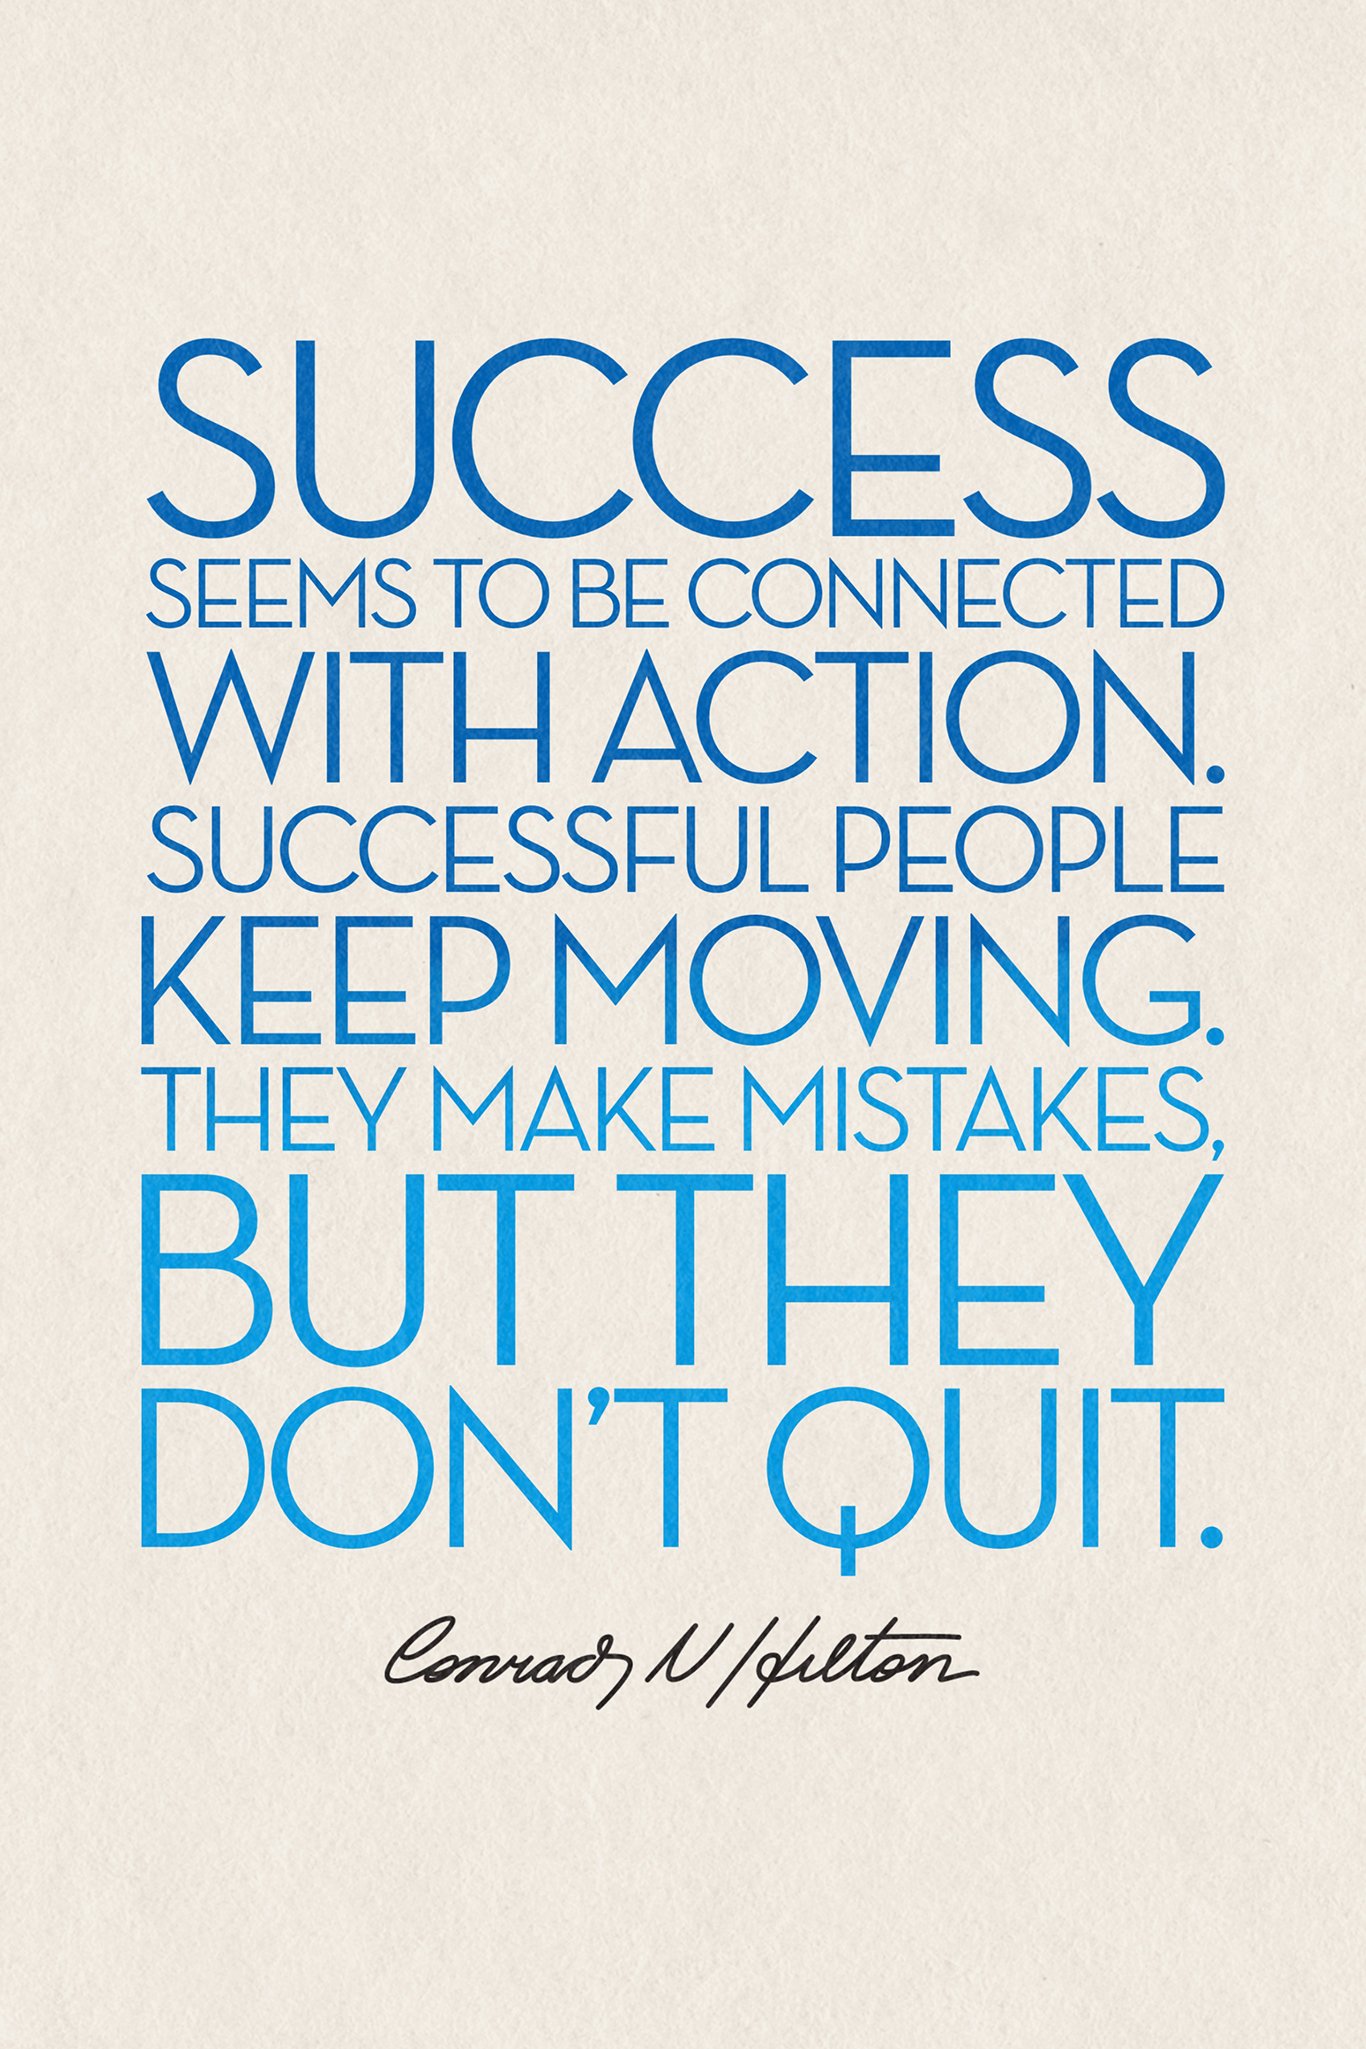 A tan poster with blue text that reads “Success seems to be connected with action. Successful people keep moving. They make mistakes, but they don’t quit.” and black text that reads “Conrad N Hilton”.